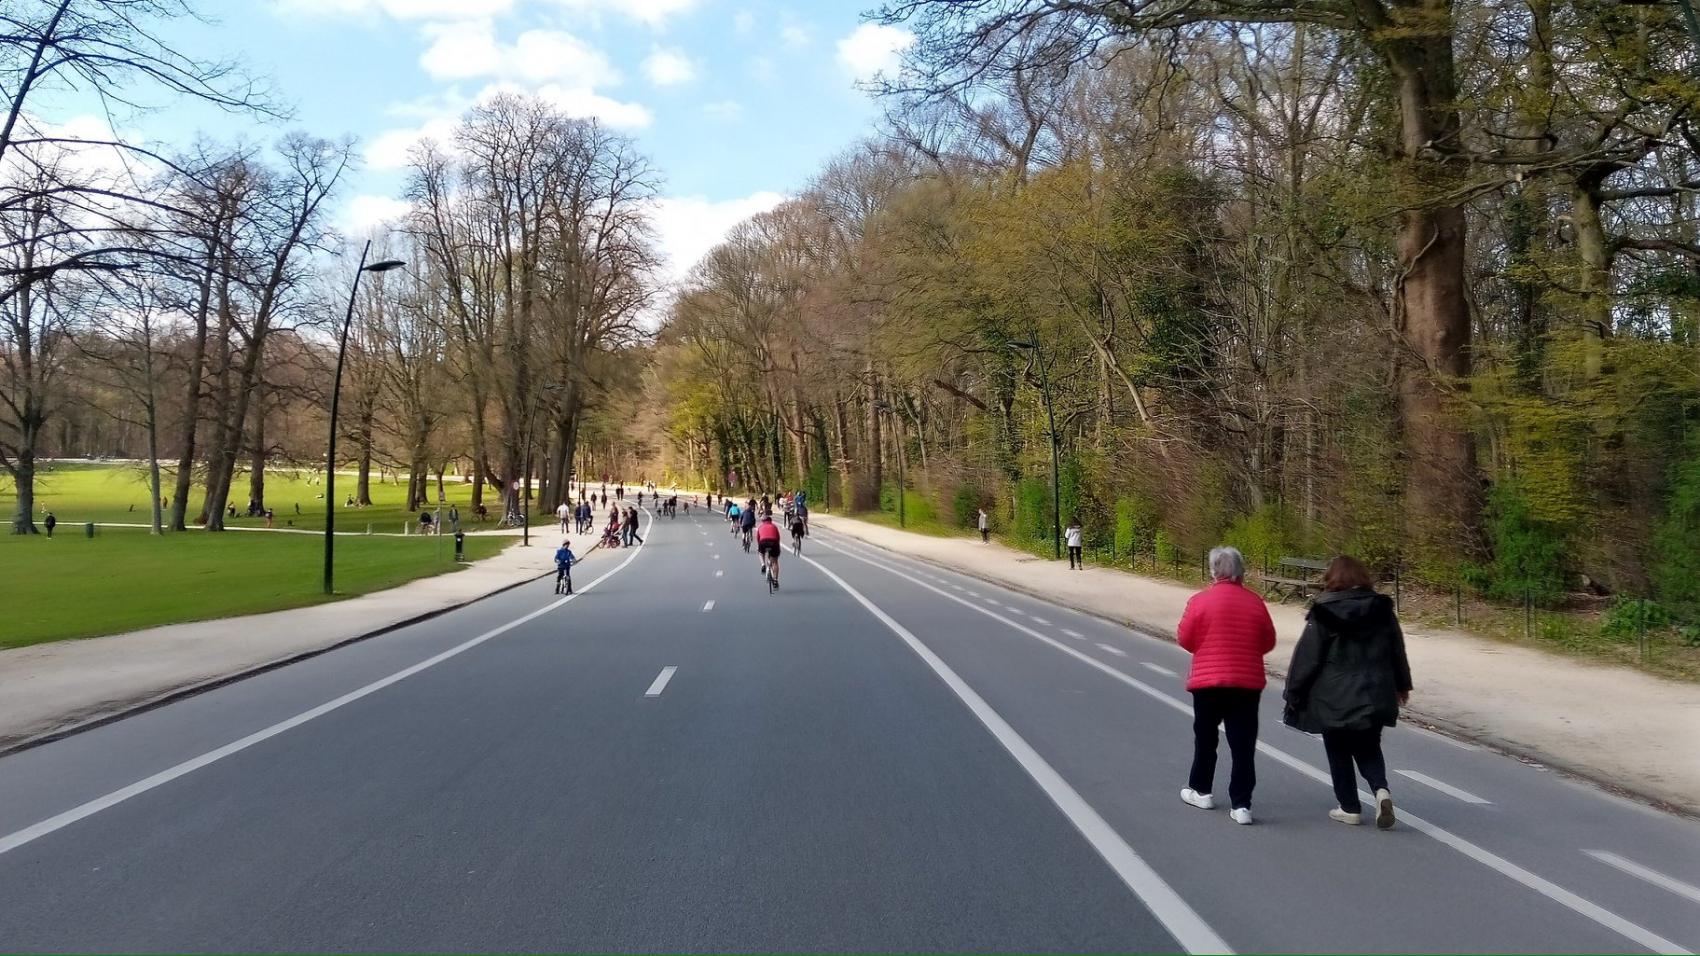 Banning cars on 5 km of roads leading through Ter Kamerenbos in Brussels created safe space for recreation for thousands of people.